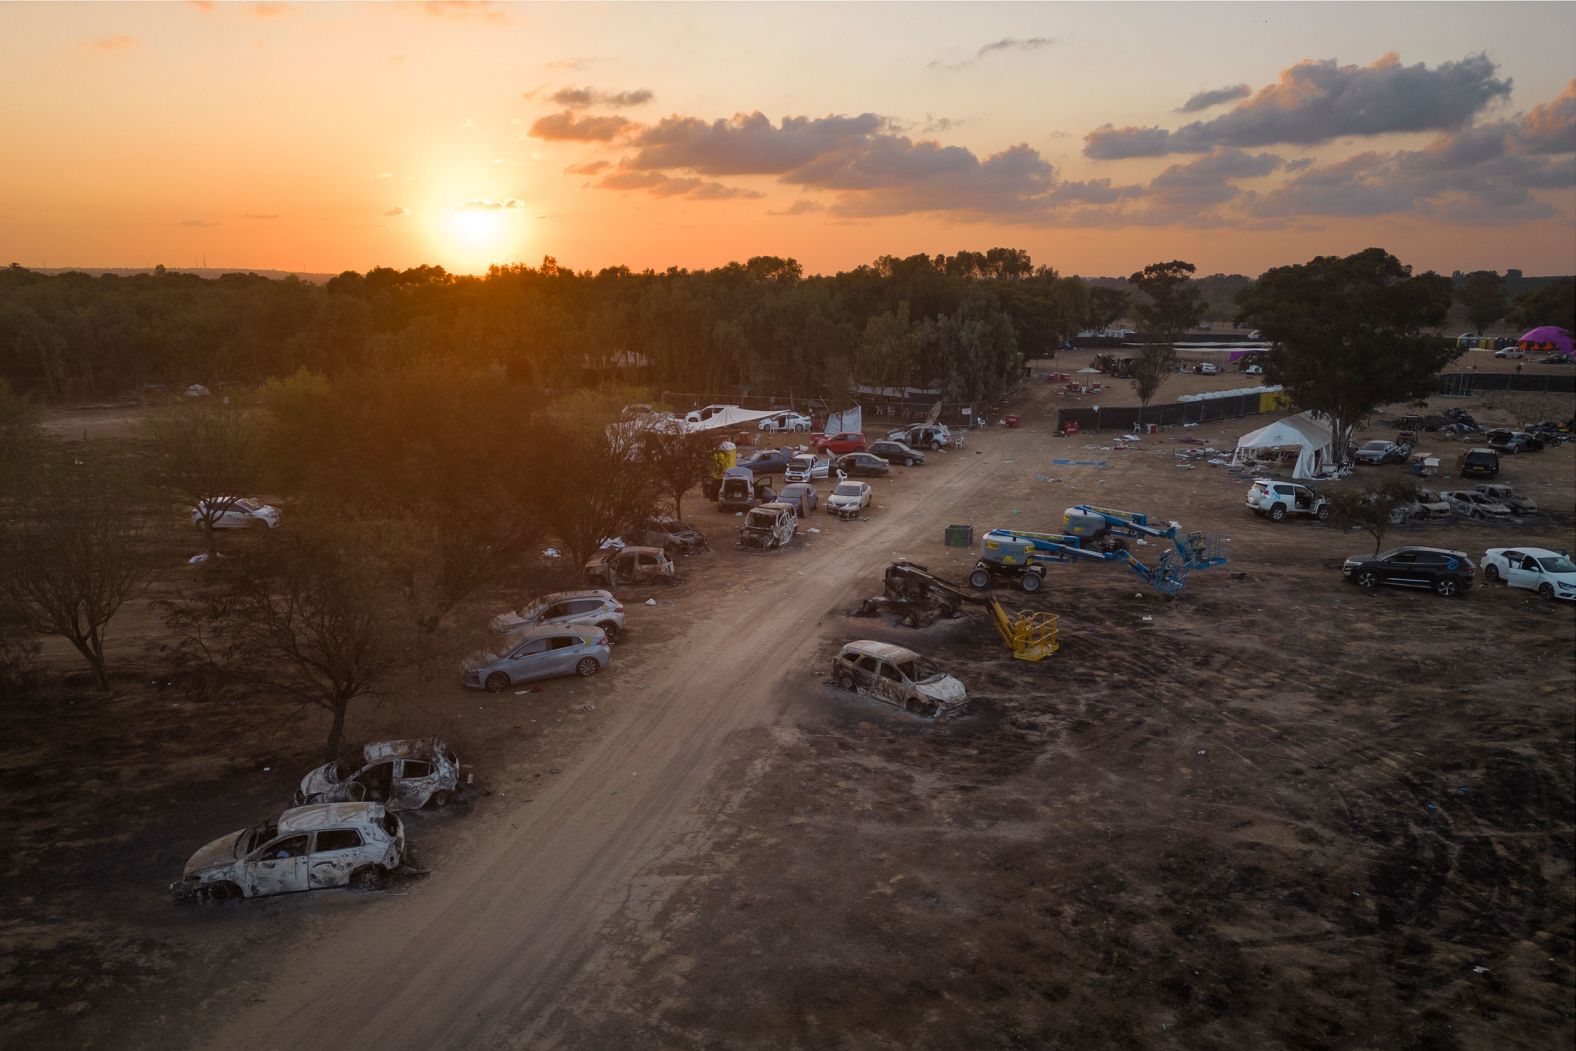 This photo, taken on Wednesday, October 11, shows the music festival camp in Israel that was overrun by Hamas militants on Saturday.